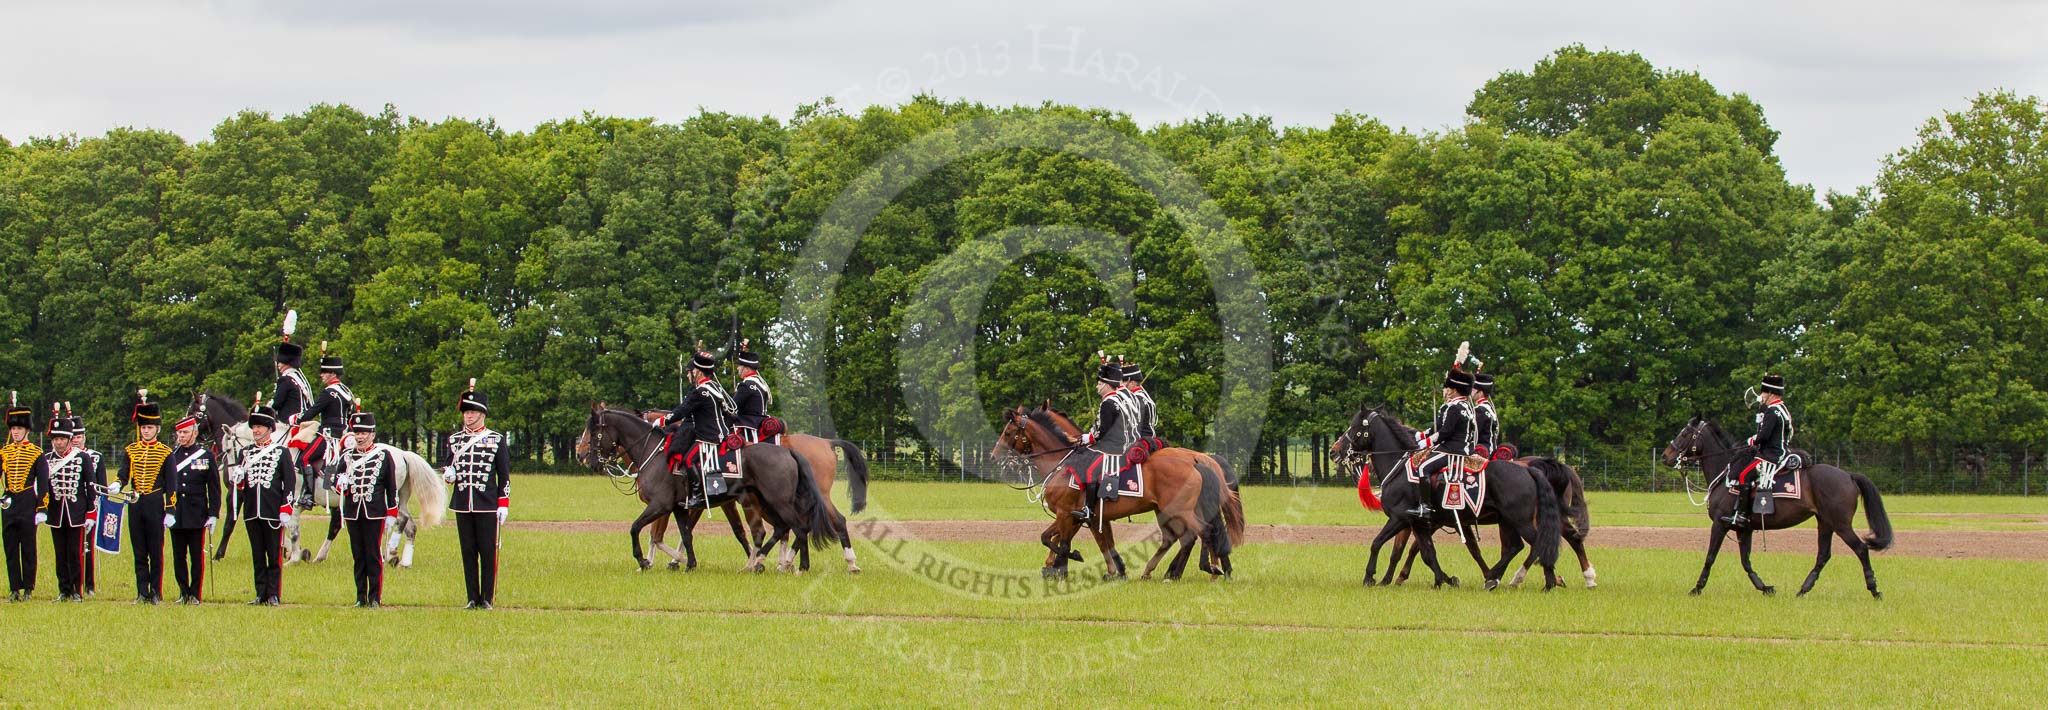 The Light Cavalry HAC Annual Review and Inspection 2013.
Windsor Great Park Review Ground,
Windsor,
Berkshire,
United Kingdom,
on 09 June 2013 at 13:34, image #429